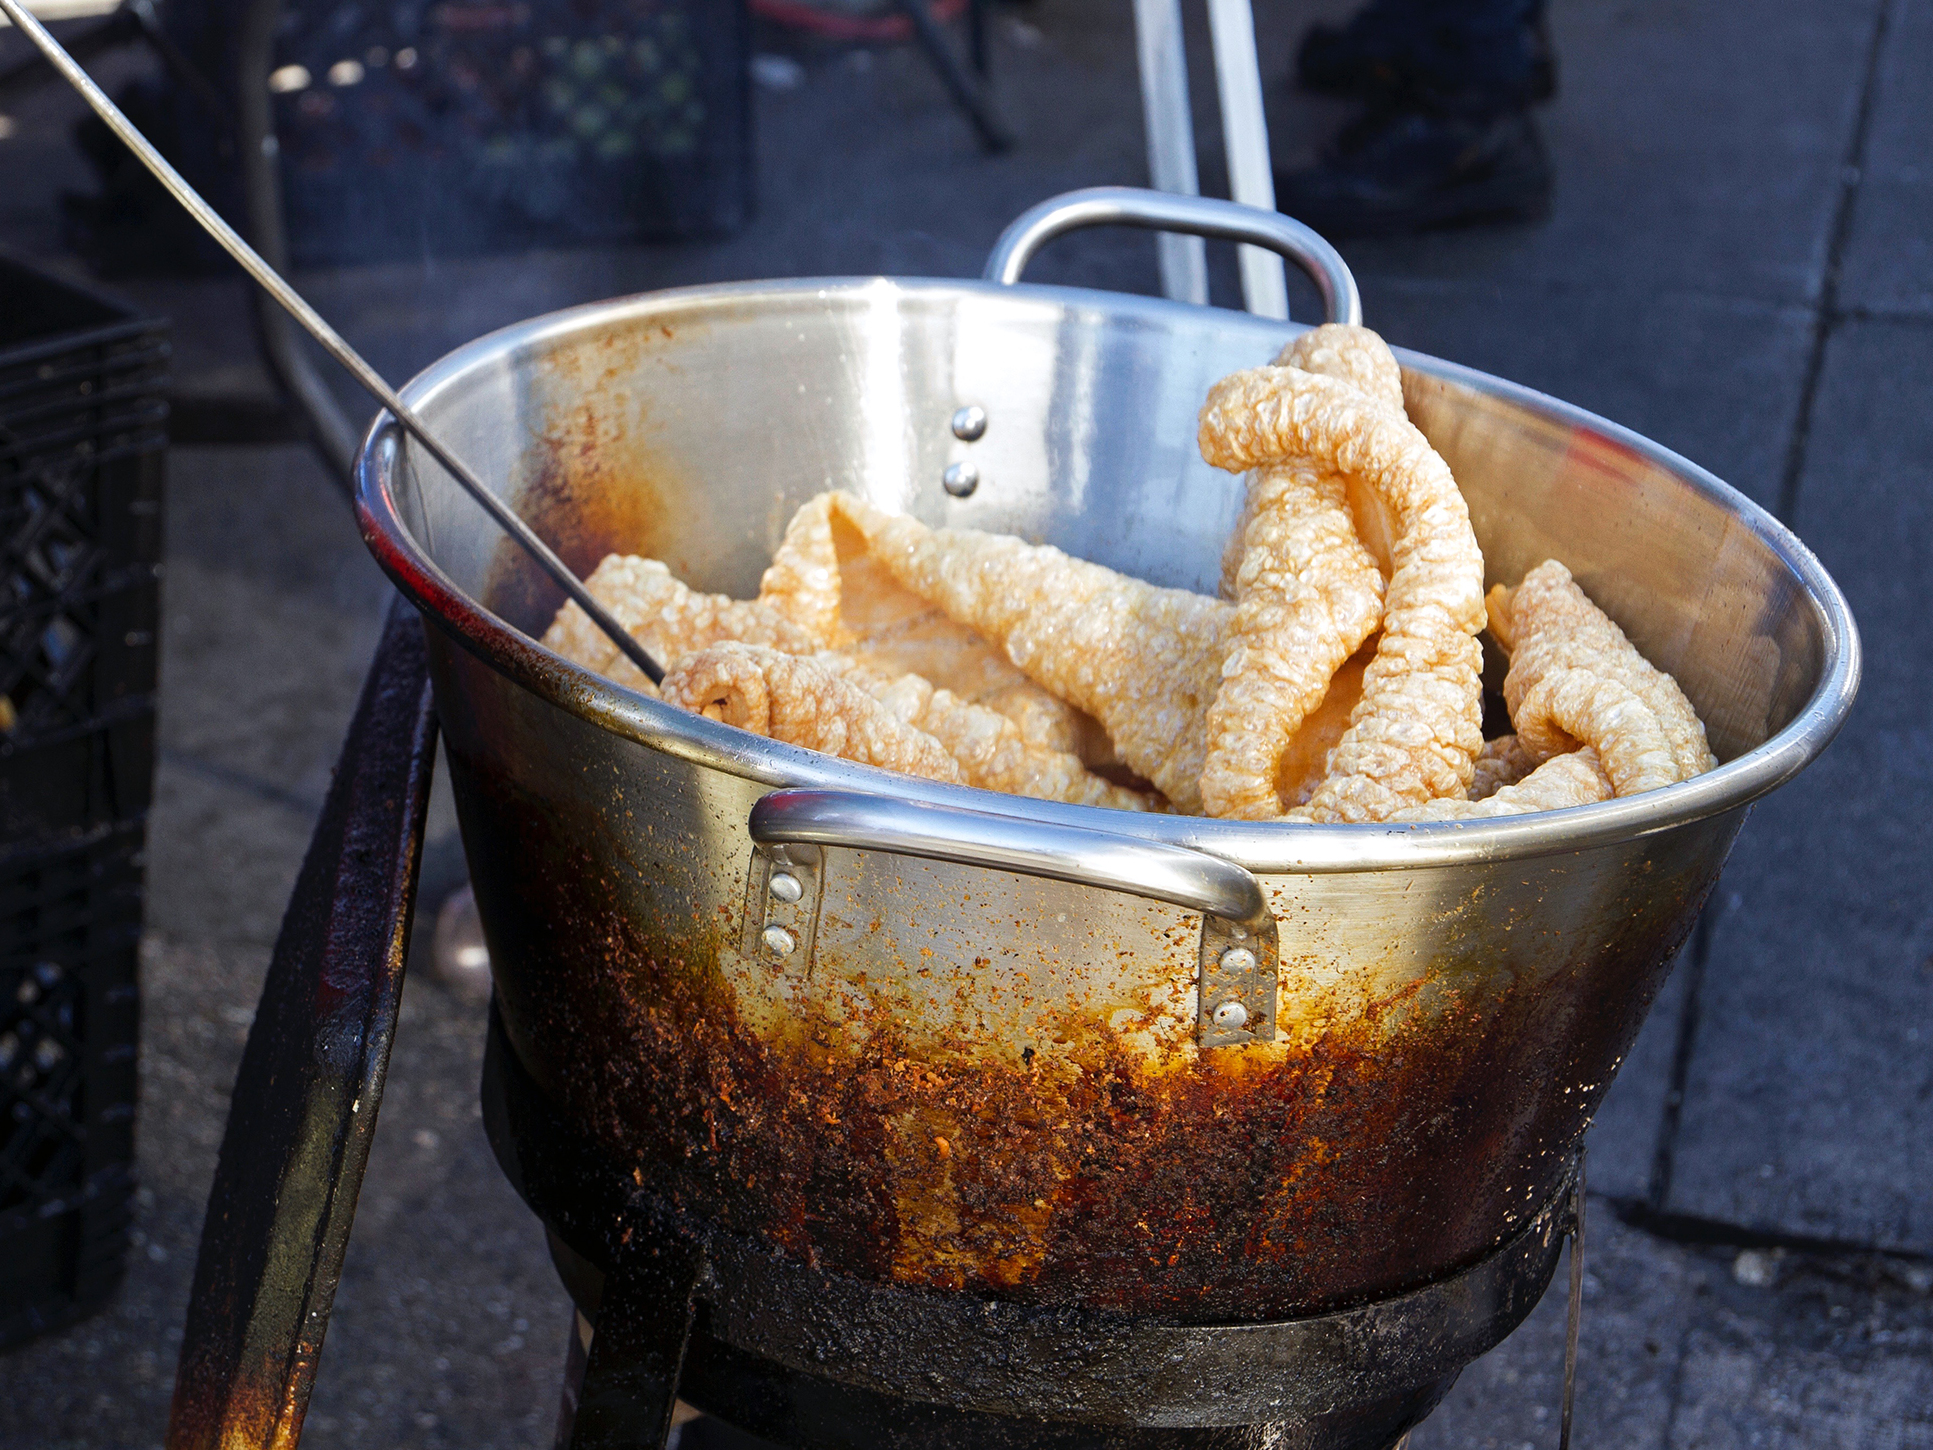 Chicharrones, or pork rinds, fry in the piñata district in Los Angeles.